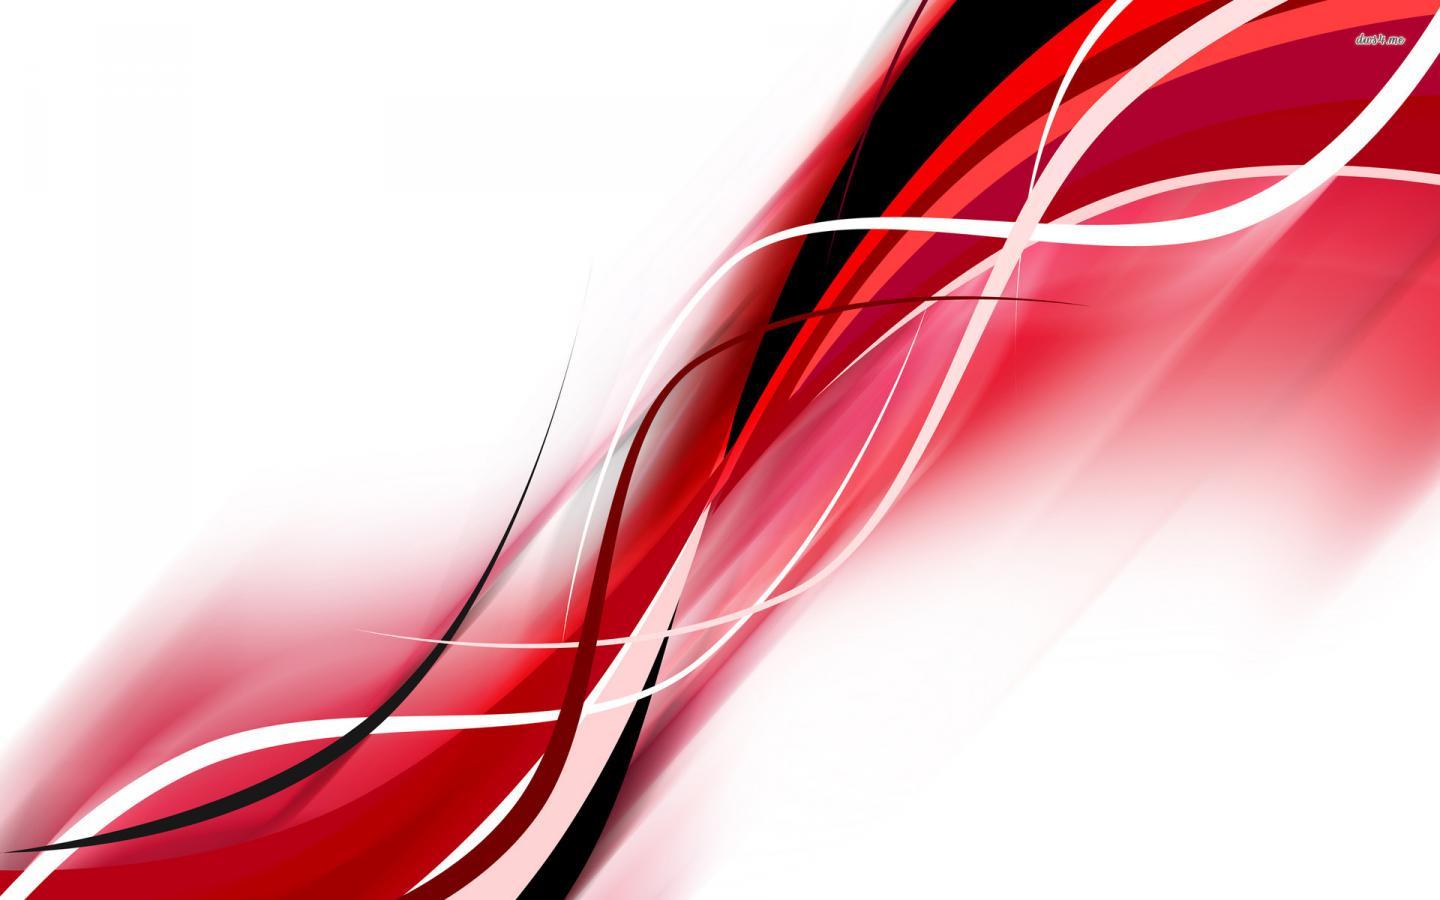 Black And White And Red Abstract Background Free Desk HD